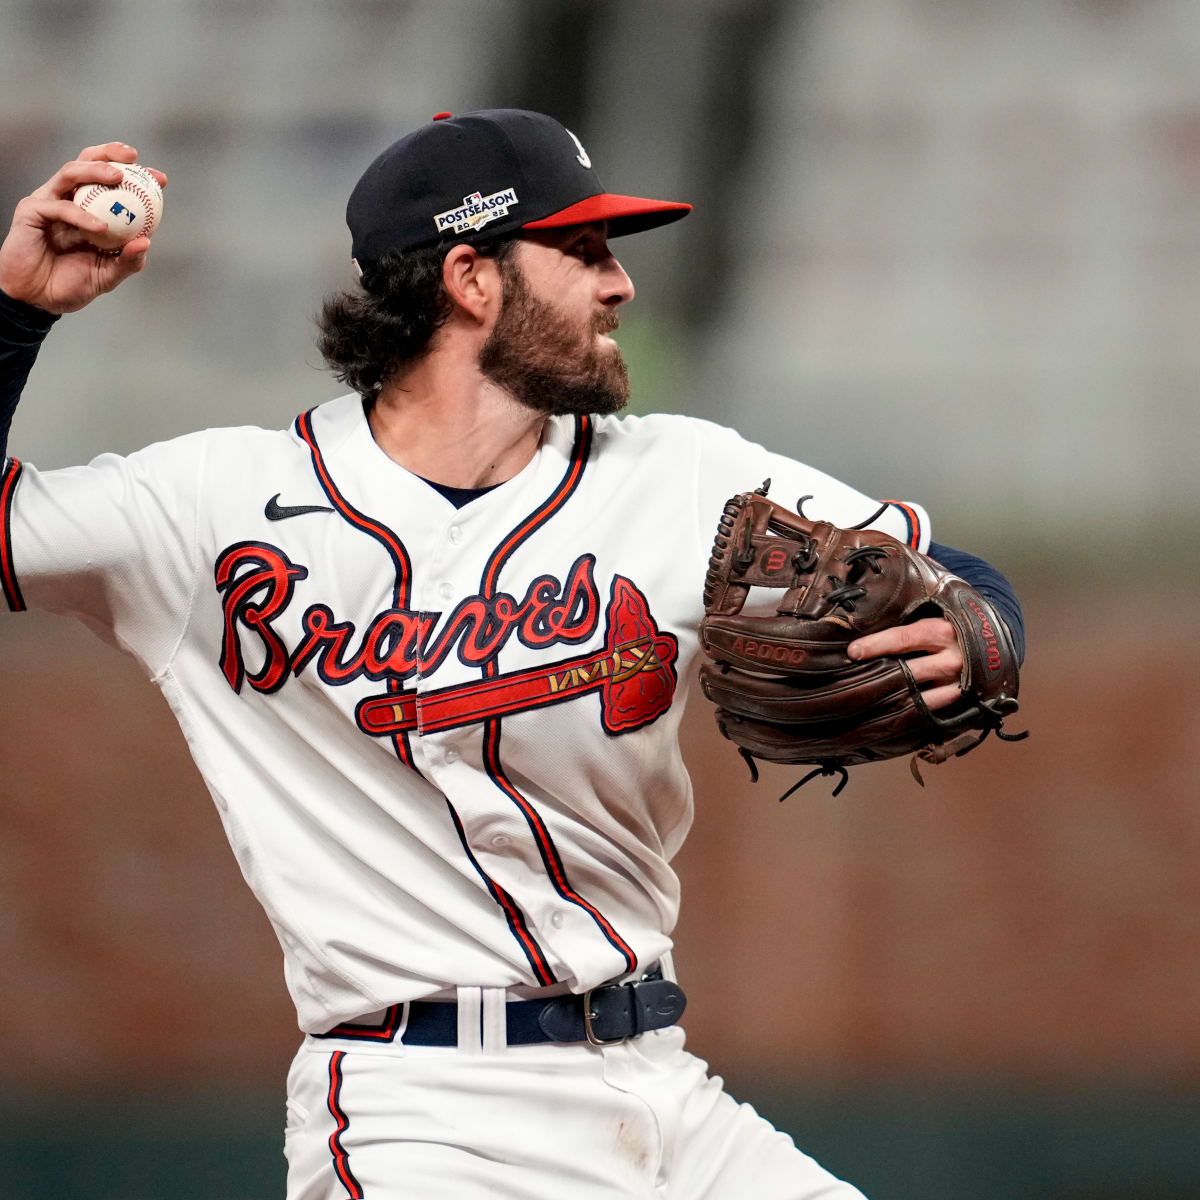 Winning mindset': How Cubs shortstop Dansby Swanson's attention to